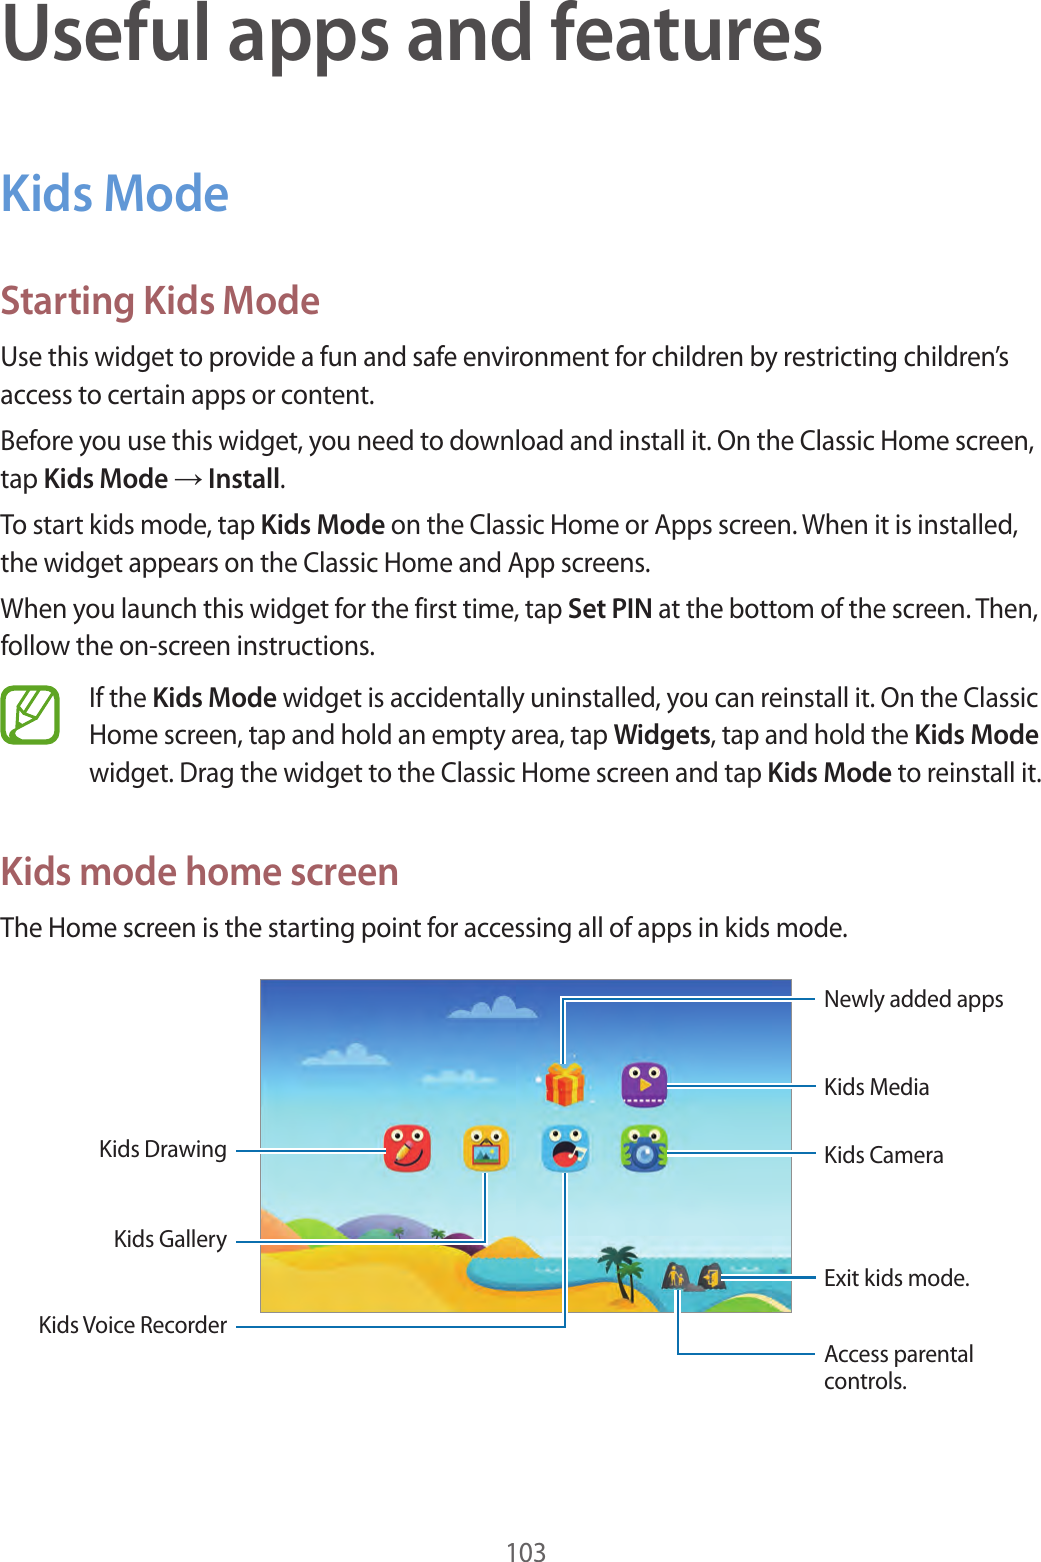 103Useful apps and featuresKids ModeStarting Kids ModeUse this widget to provide a fun and safe environment for children by restricting children’s access to certain apps or content.Before you use this widget, you need to download and install it. On the Classic Home screen, tap Kids Mode → Install.To start kids mode, tap Kids Mode on the Classic Home or Apps screen. When it is installed, the widget appears on the Classic Home and App screens.When you launch this widget for the first time, tap Set PIN at the bottom of the screen. Then, follow the on-screen instructions.If the Kids Mode widget is accidentally uninstalled, you can reinstall it. On the Classic Home screen, tap and hold an empty area, tap Widgets, tap and hold the Kids Mode widget. Drag the widget to the Classic Home screen and tap Kids Mode to reinstall it.Kids mode home screenThe Home screen is the starting point for accessing all of apps in kids mode.Kids DrawingKids MediaExit kids mode.Access parental controls.Newly added appsKids Voice RecorderKids CameraKids Gallery